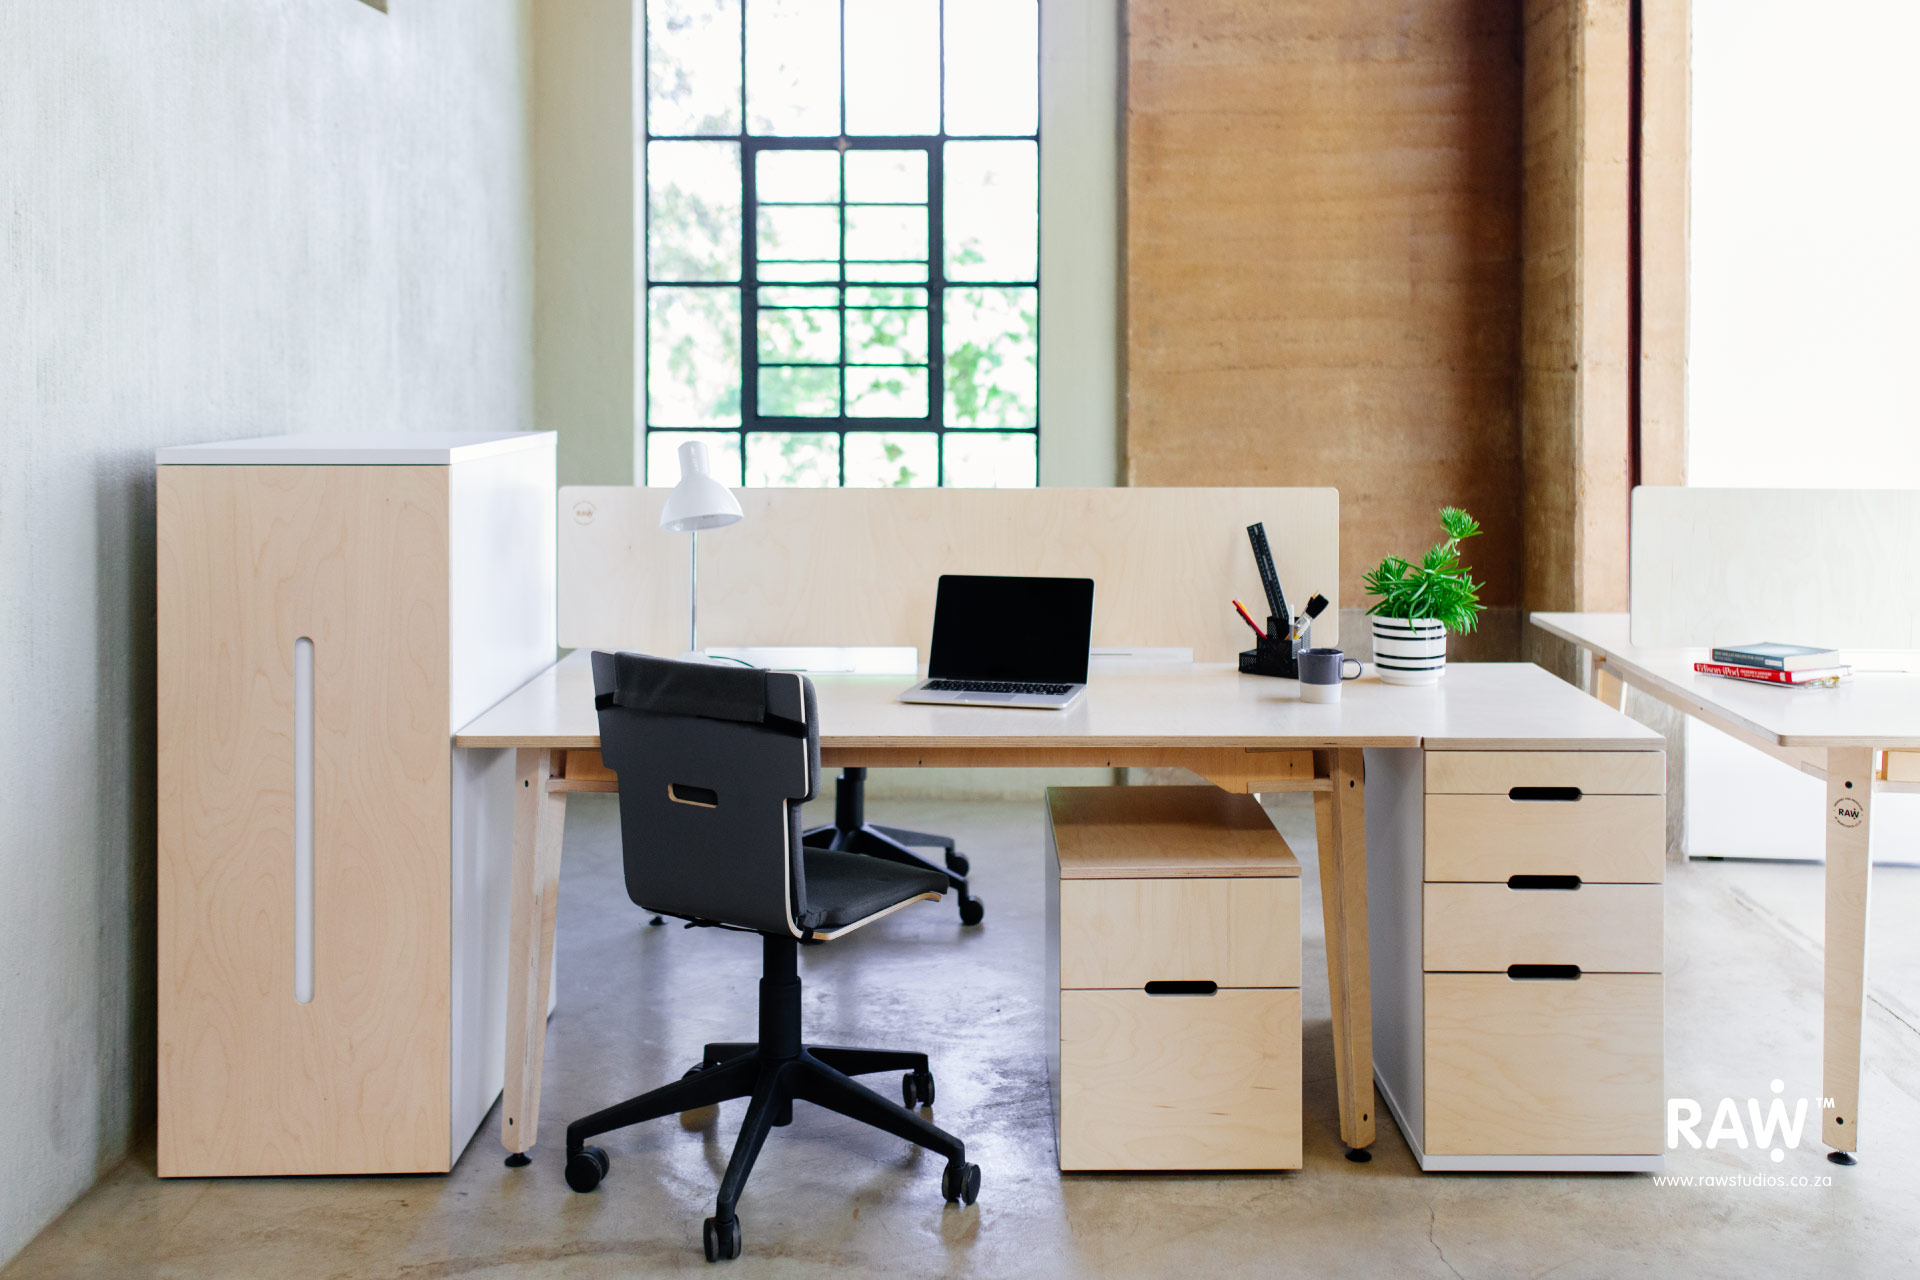 New All Ekstend Basik to Tall: Office Storage Solutions Desk Furniture